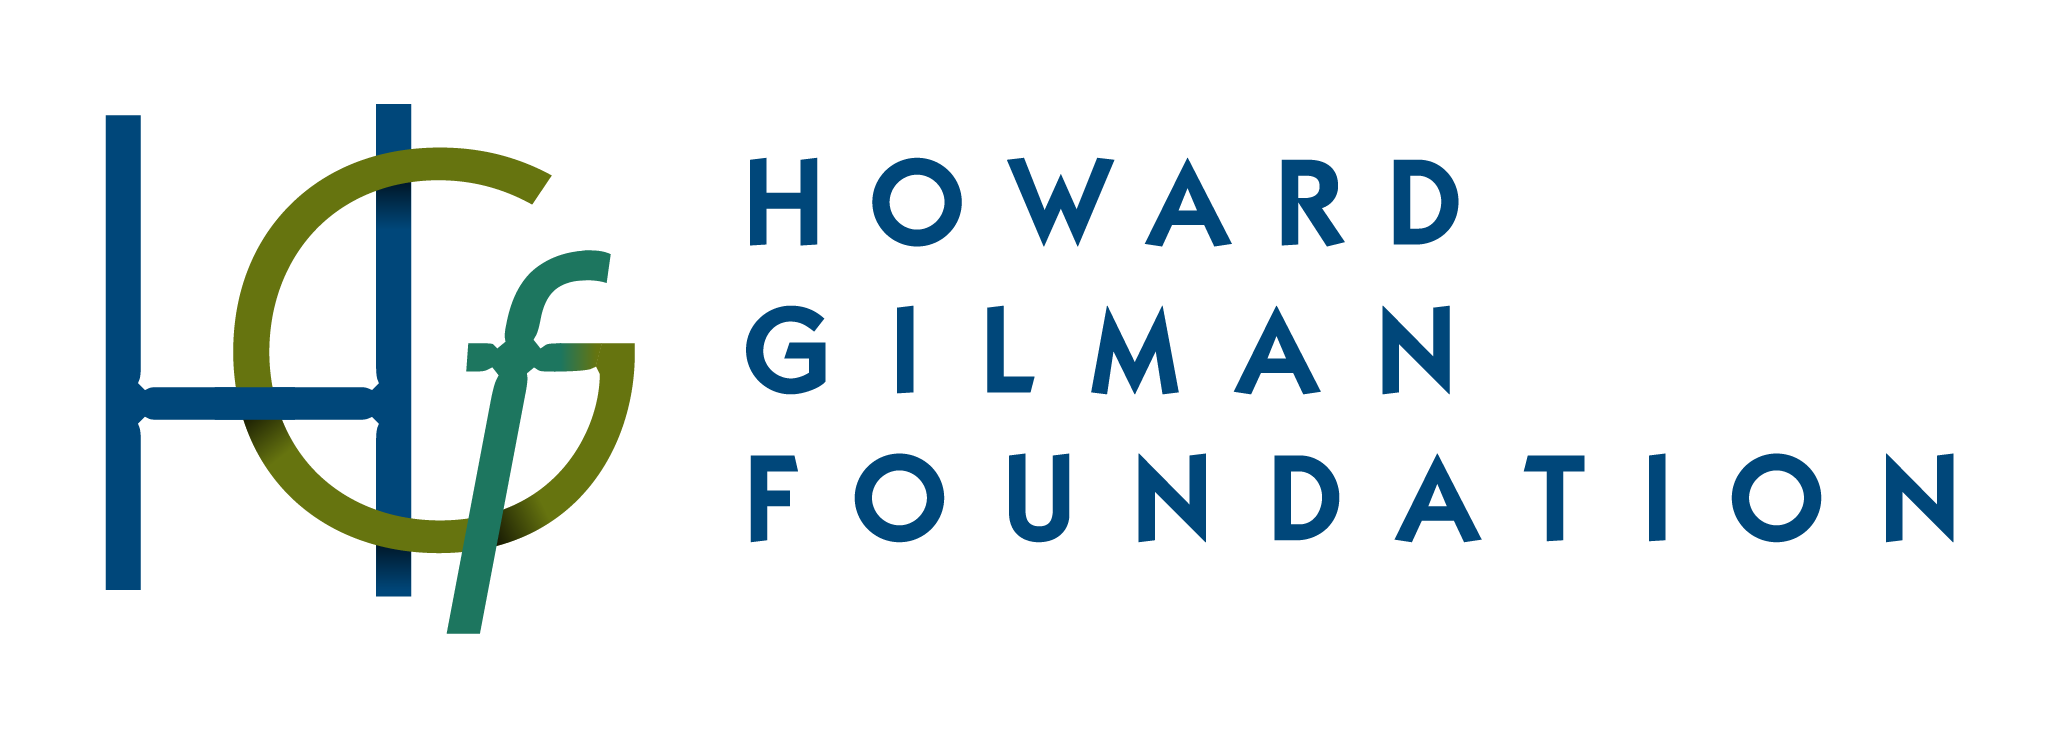 HGf in Blue, Green and Teal next to Howard Gilman Foundation in blue